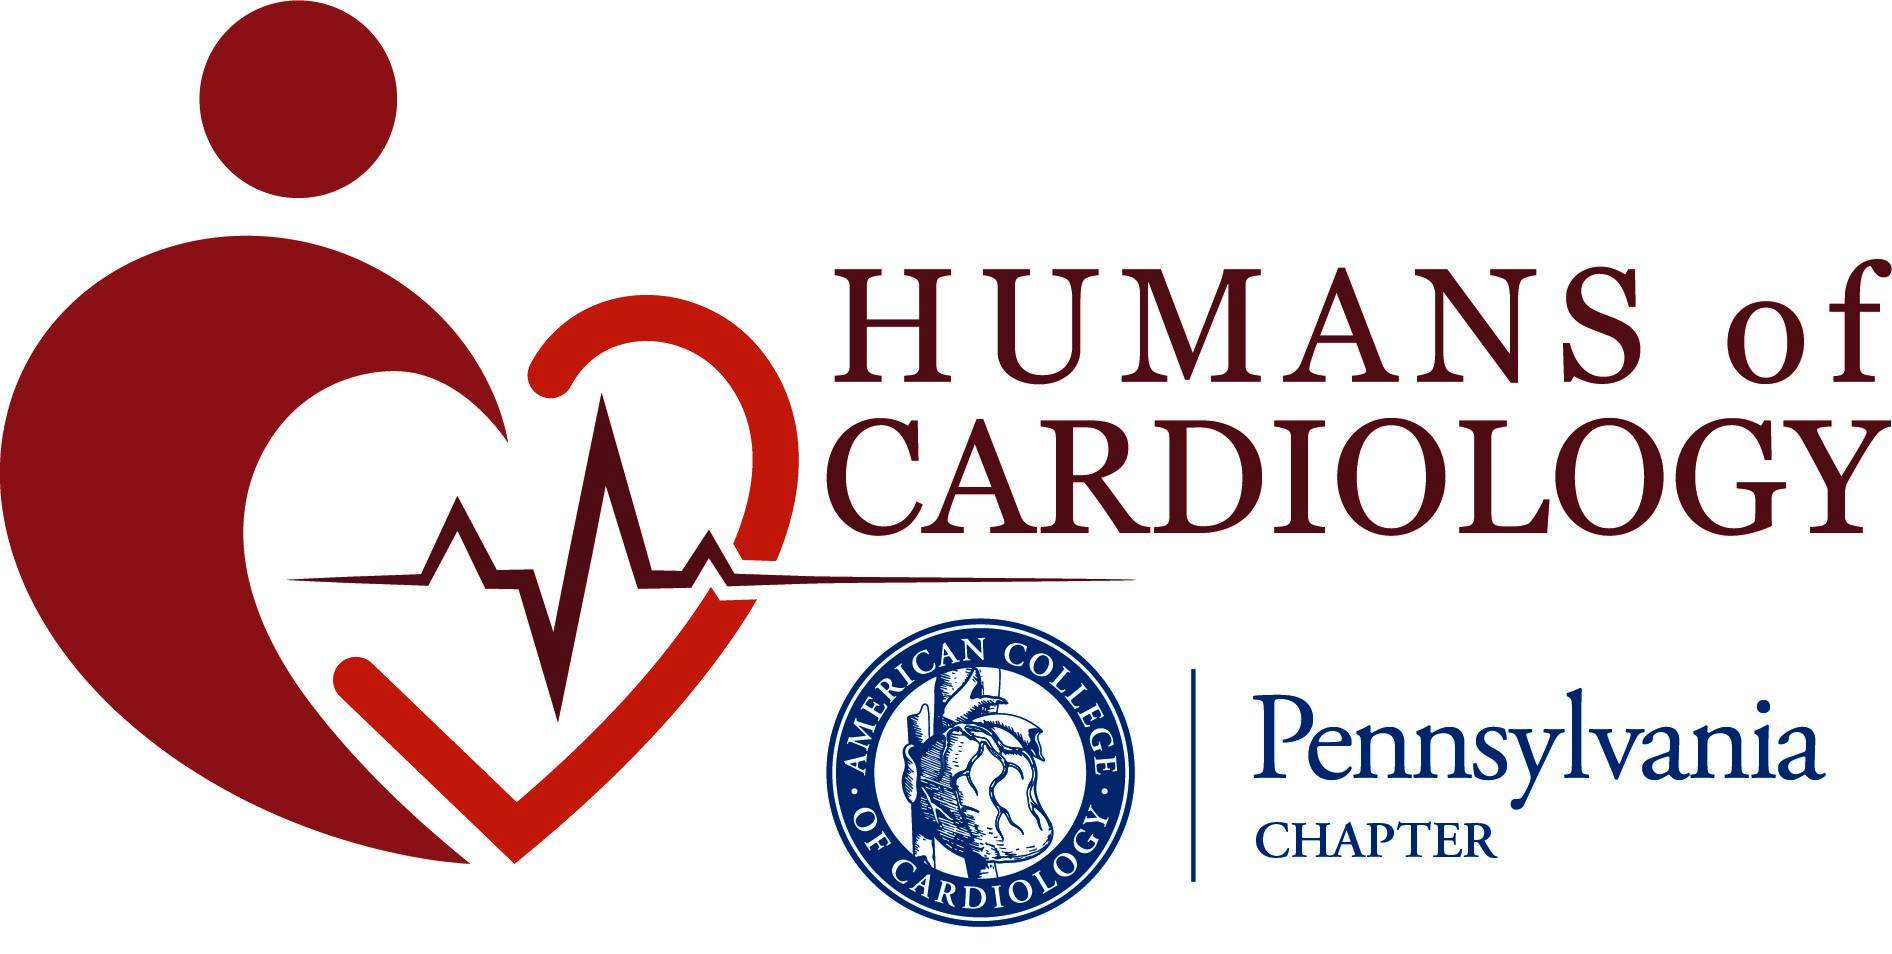 Humans of Cardiology logo